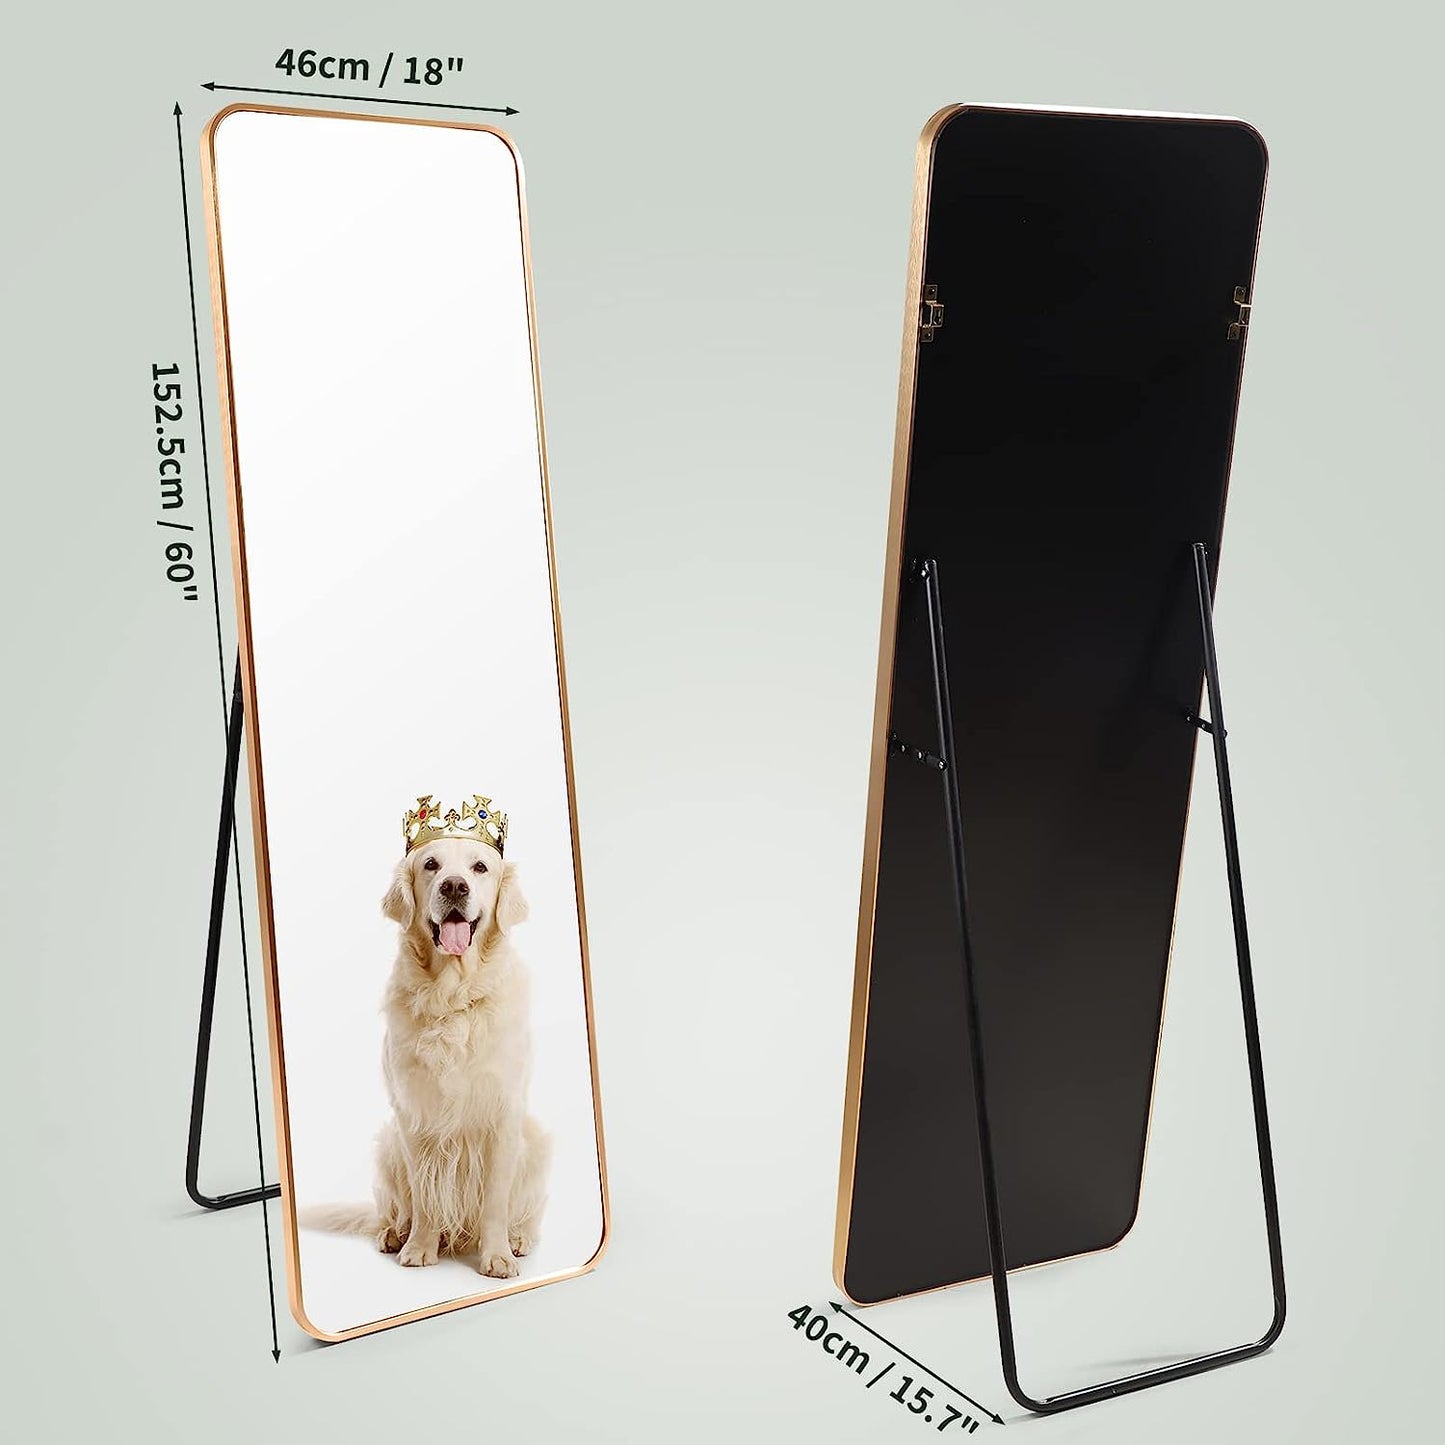 Gold Full Length Floor Mirror with Aluminum Frame for Wall Mounted, Standing, Leaning, 60"x18" Full Body Large Mirror for Dressing Room, Bedroom, Bathroom